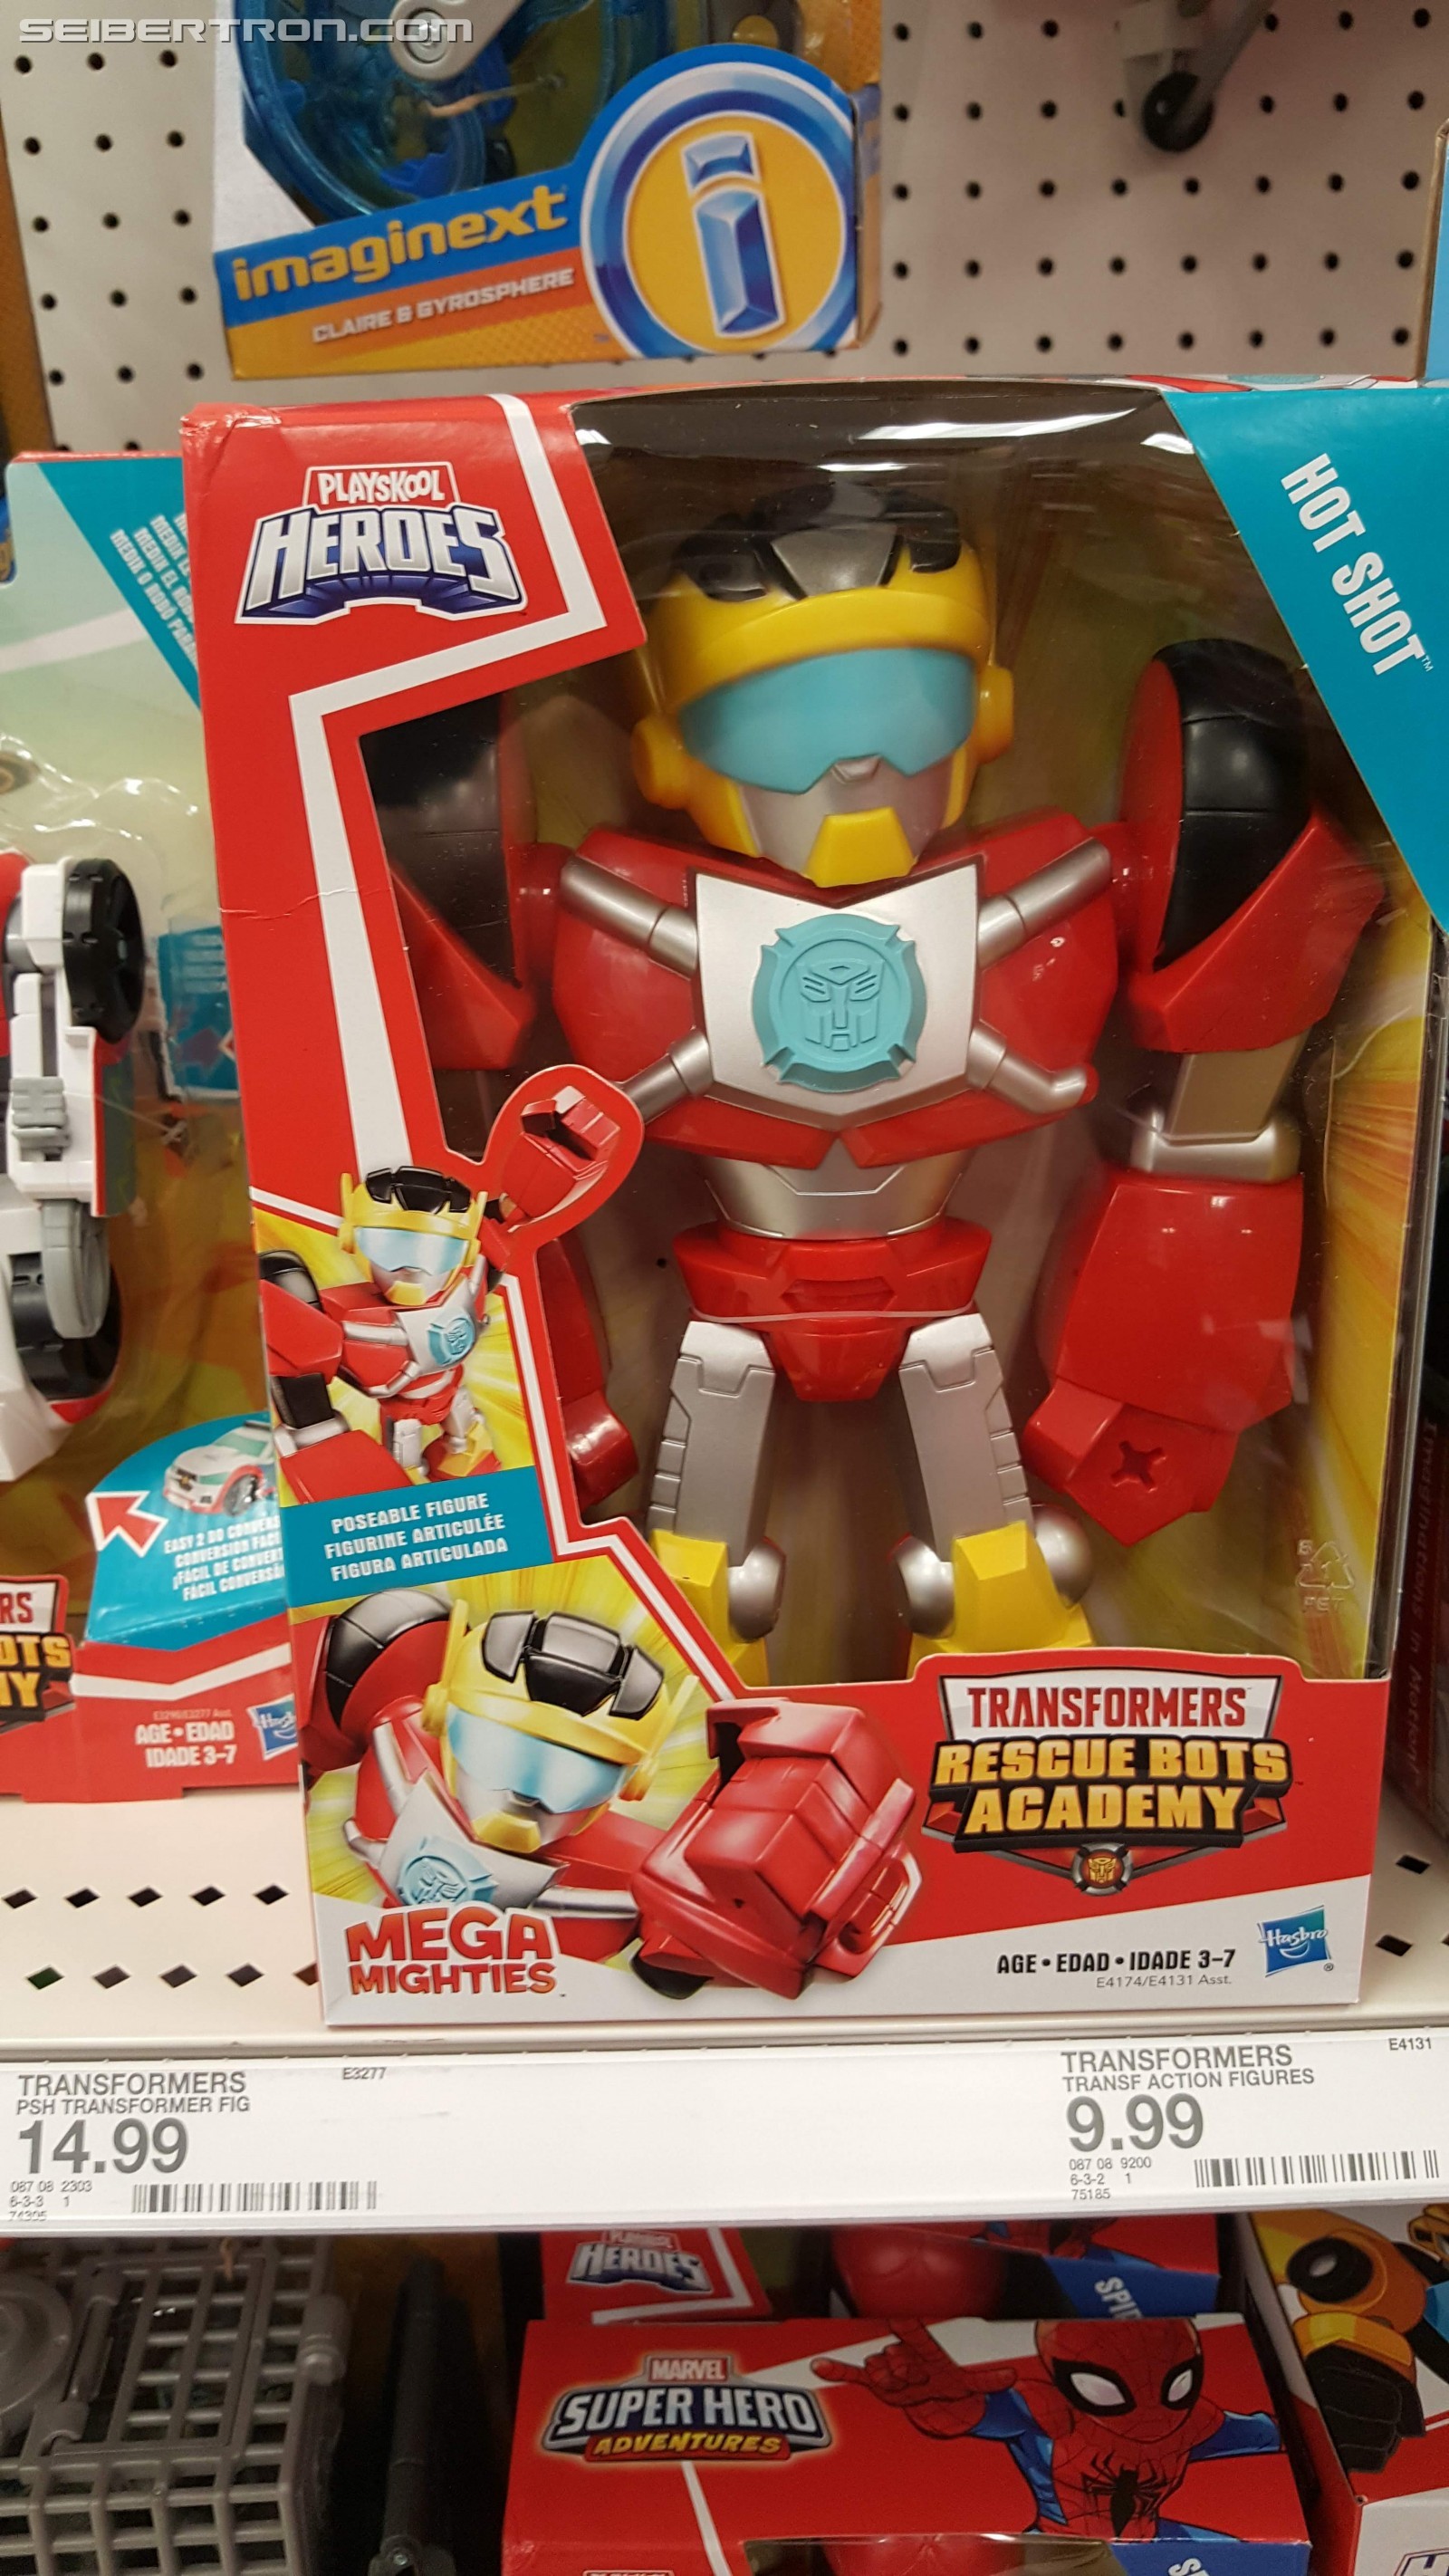 Details about   Playskool Heroes Hot Shot Transformers Rescue Bots Poseable Figure Ages 3-7 NEW 